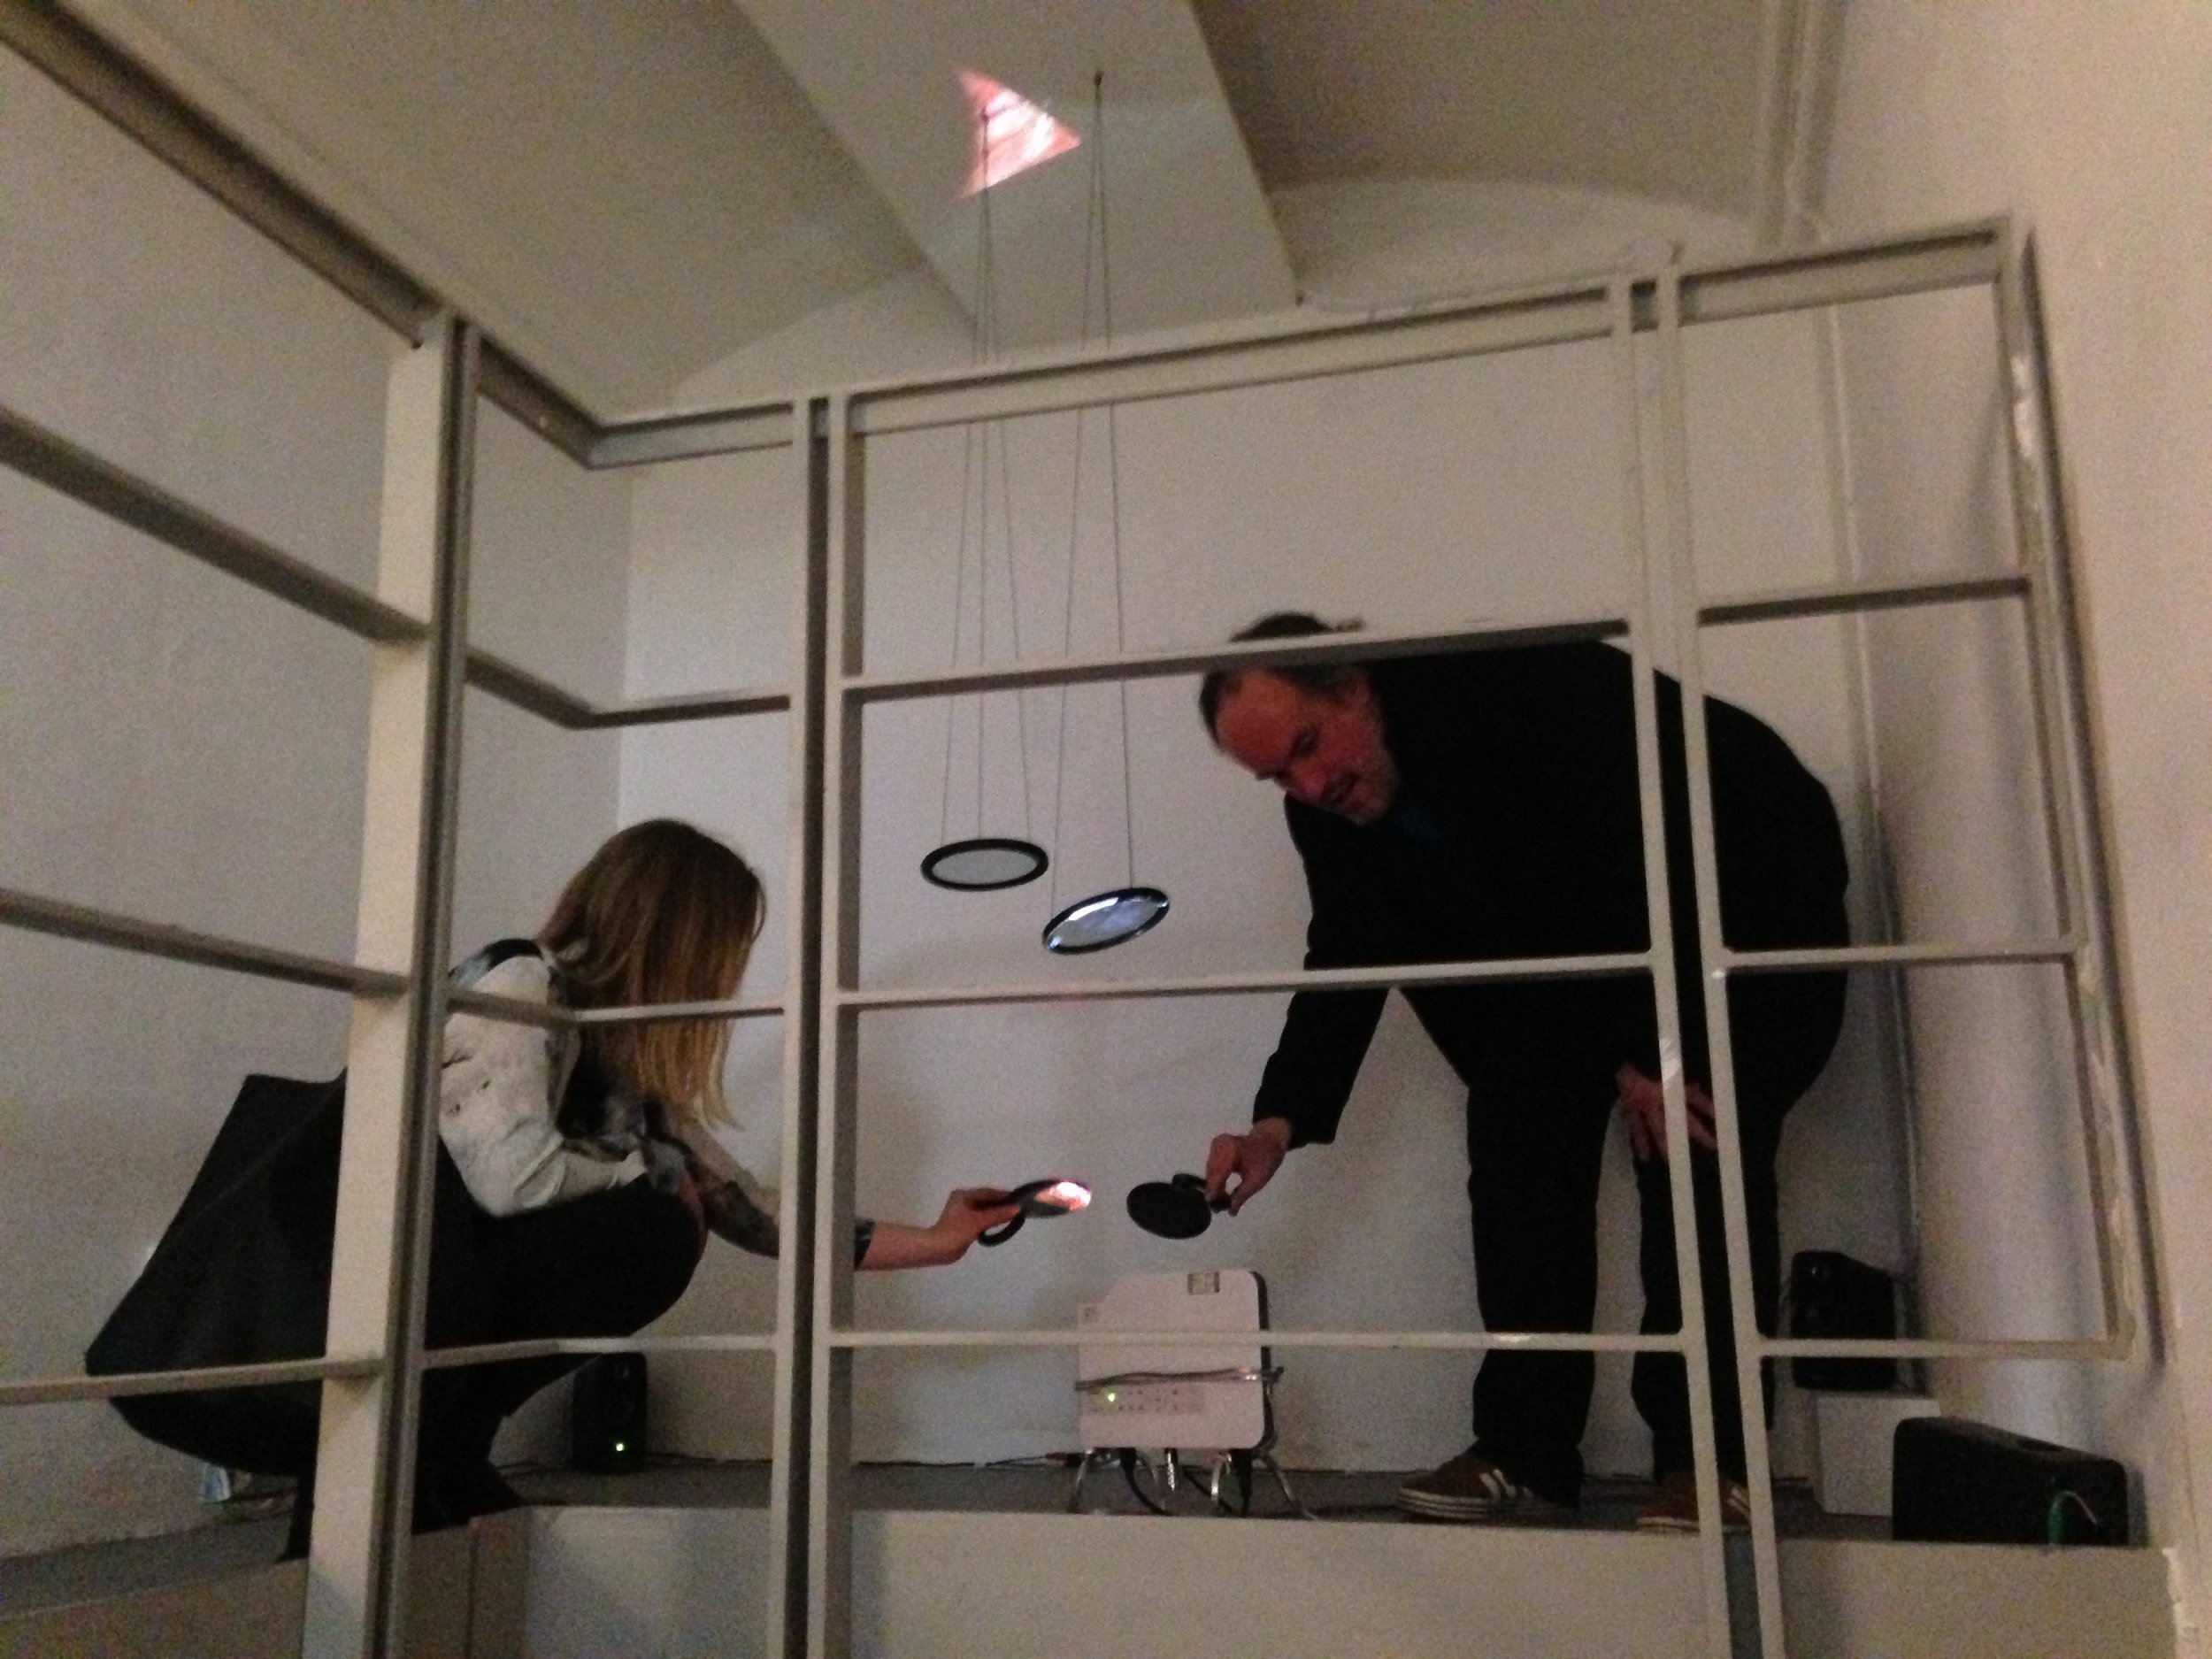  Two viewers exploring the projection using handheld mirrors 